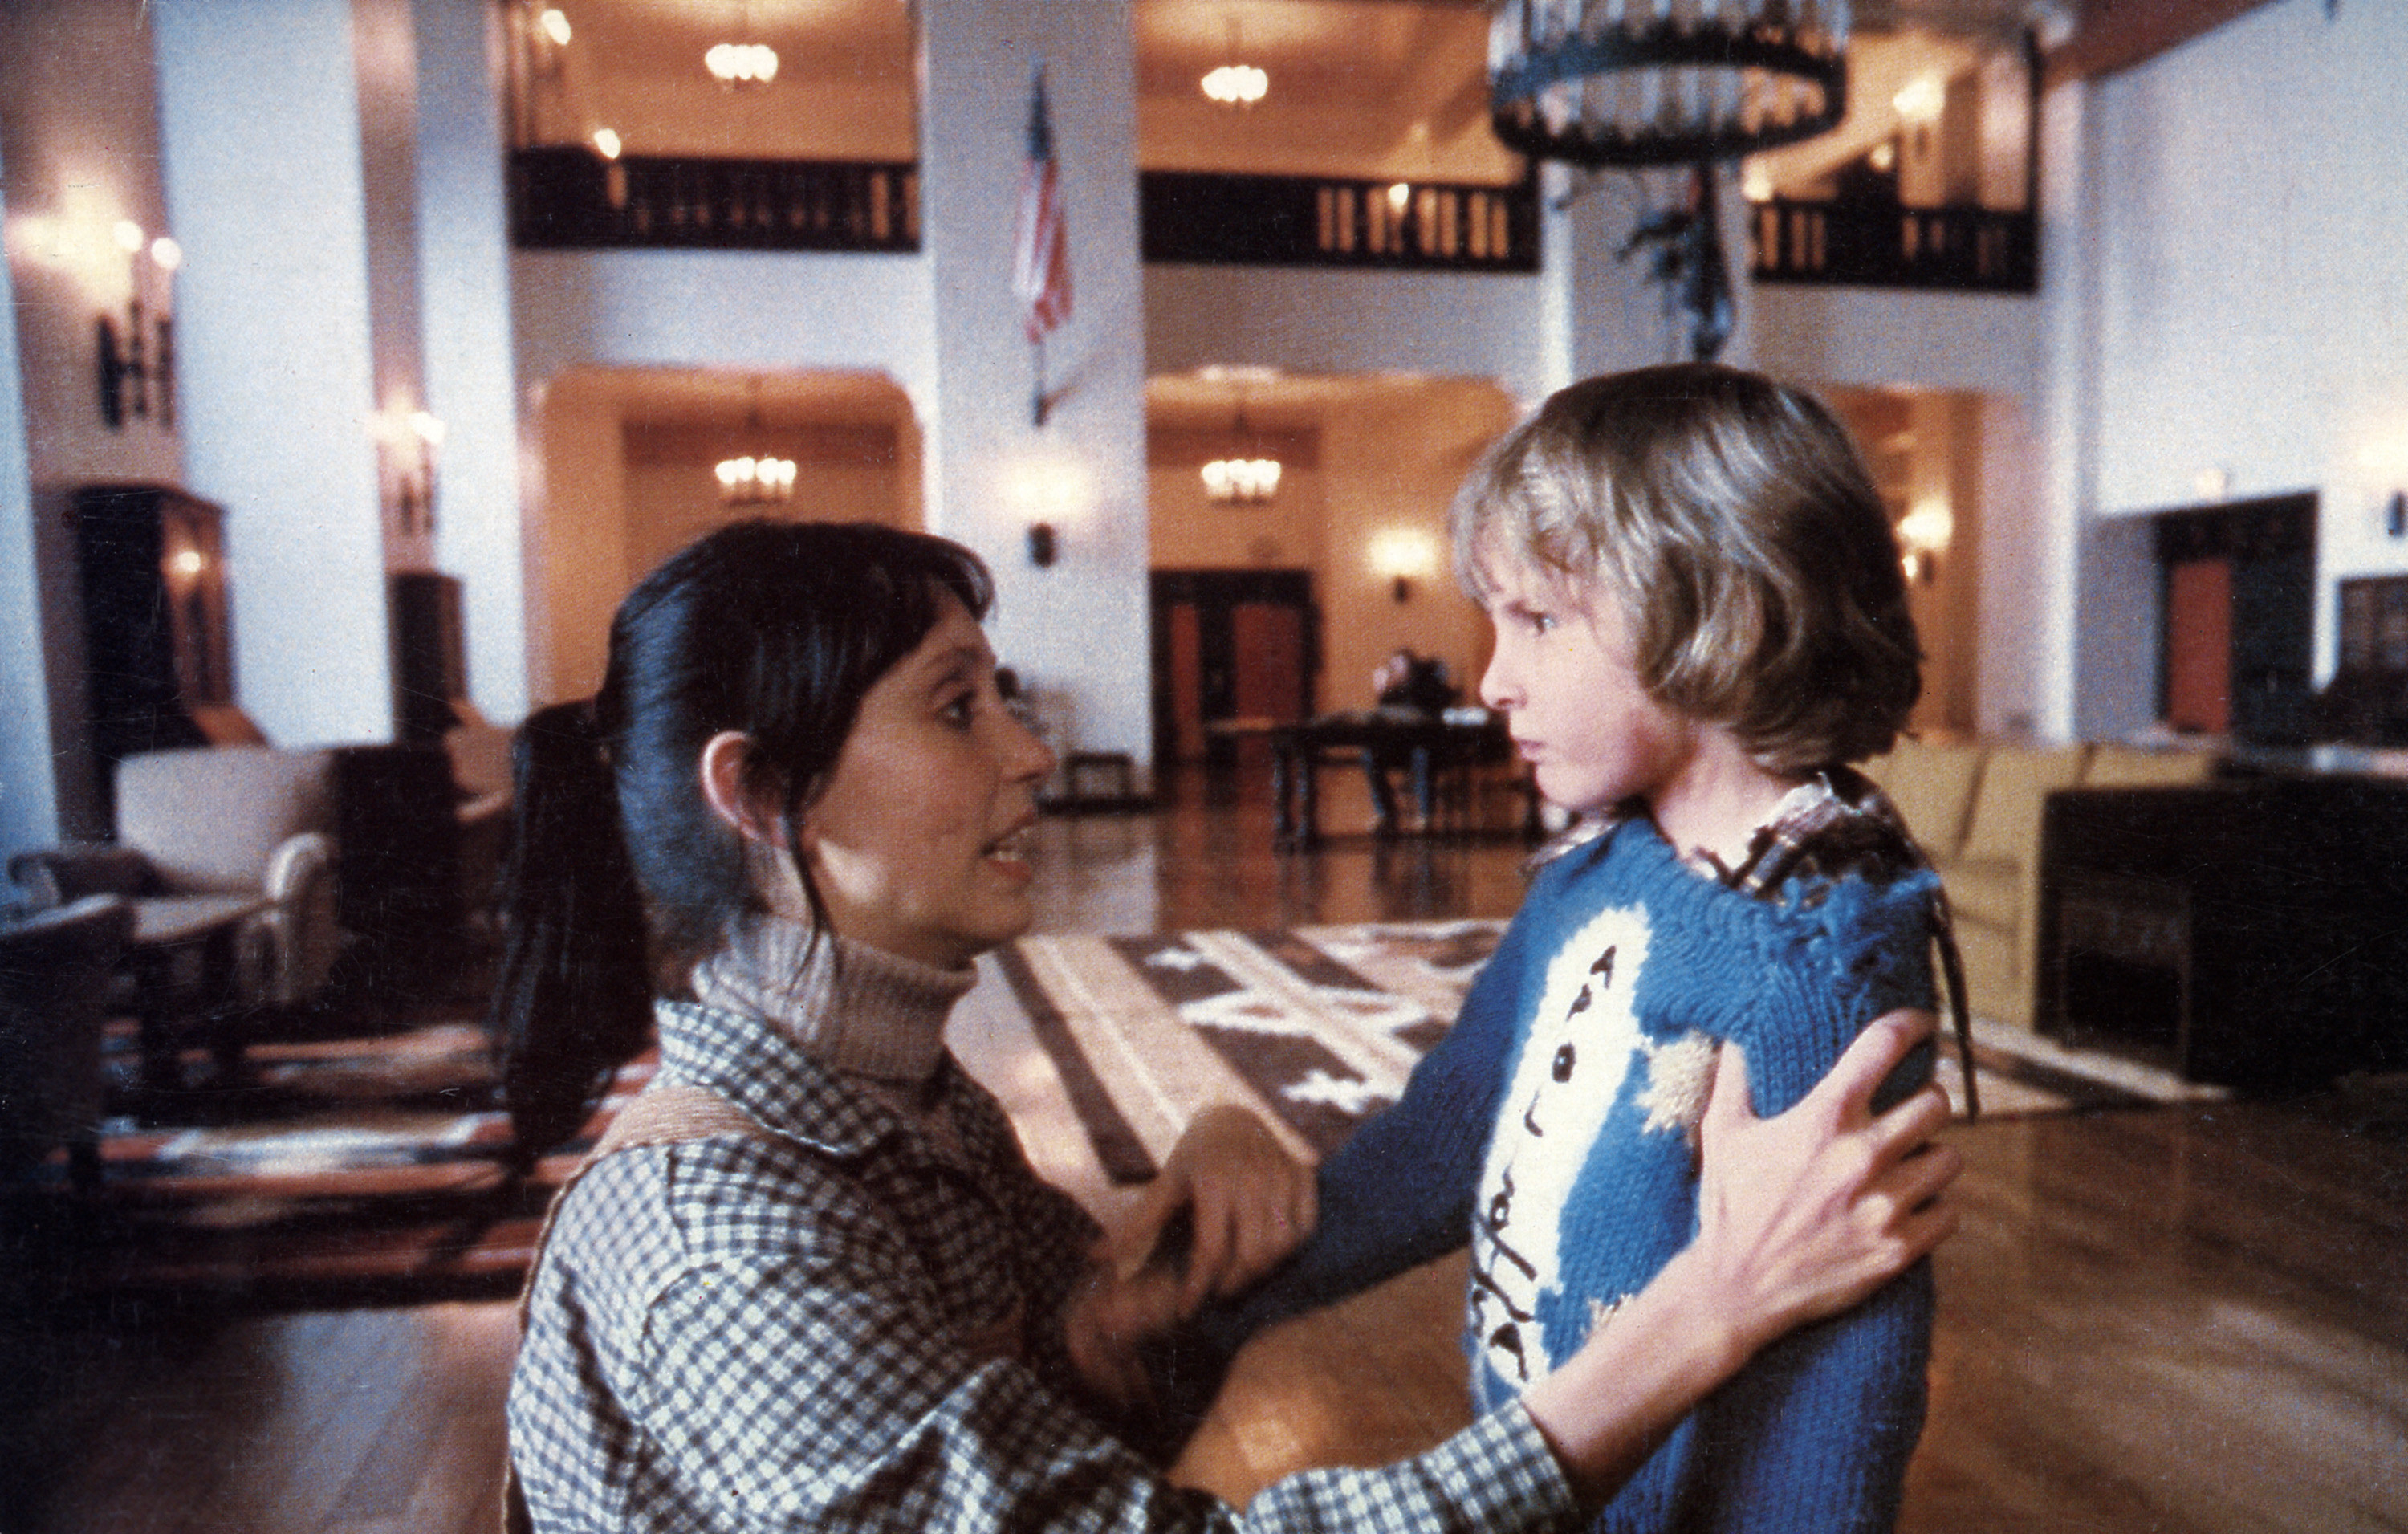 Danny with Shelley Duvall in the movie